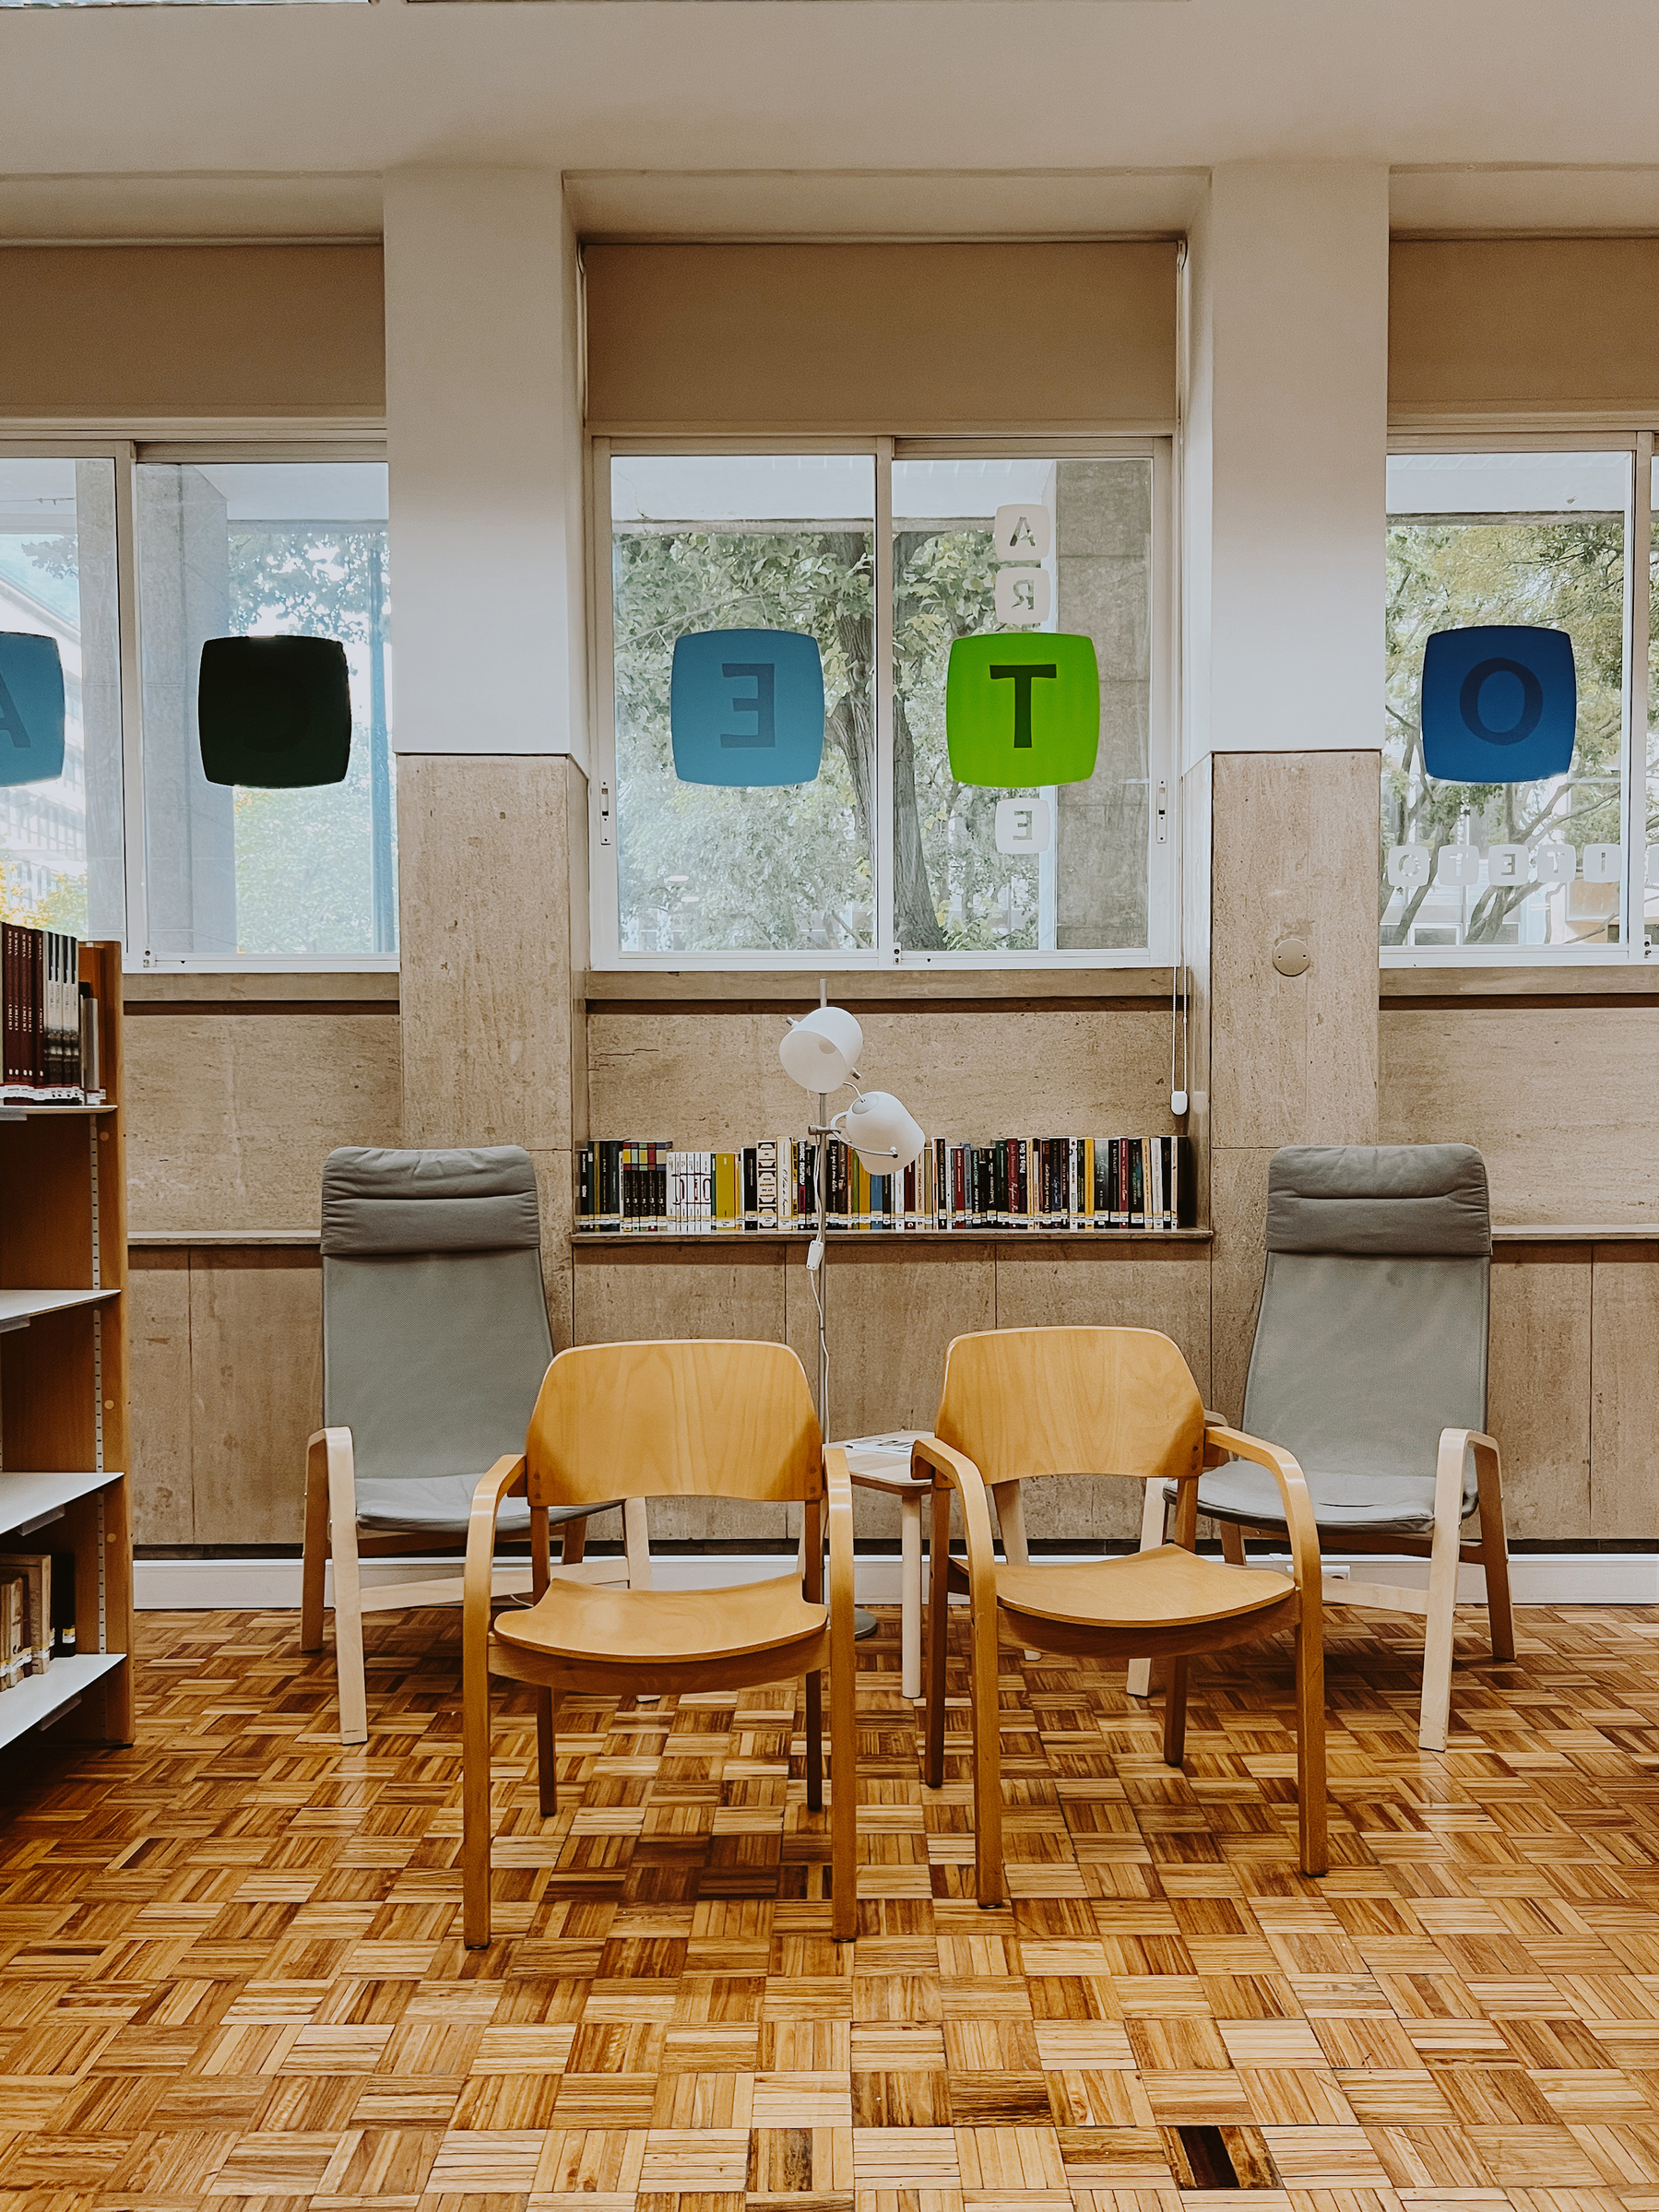 Empty chairs on a wooden floor. A bookshelf on the left side. 